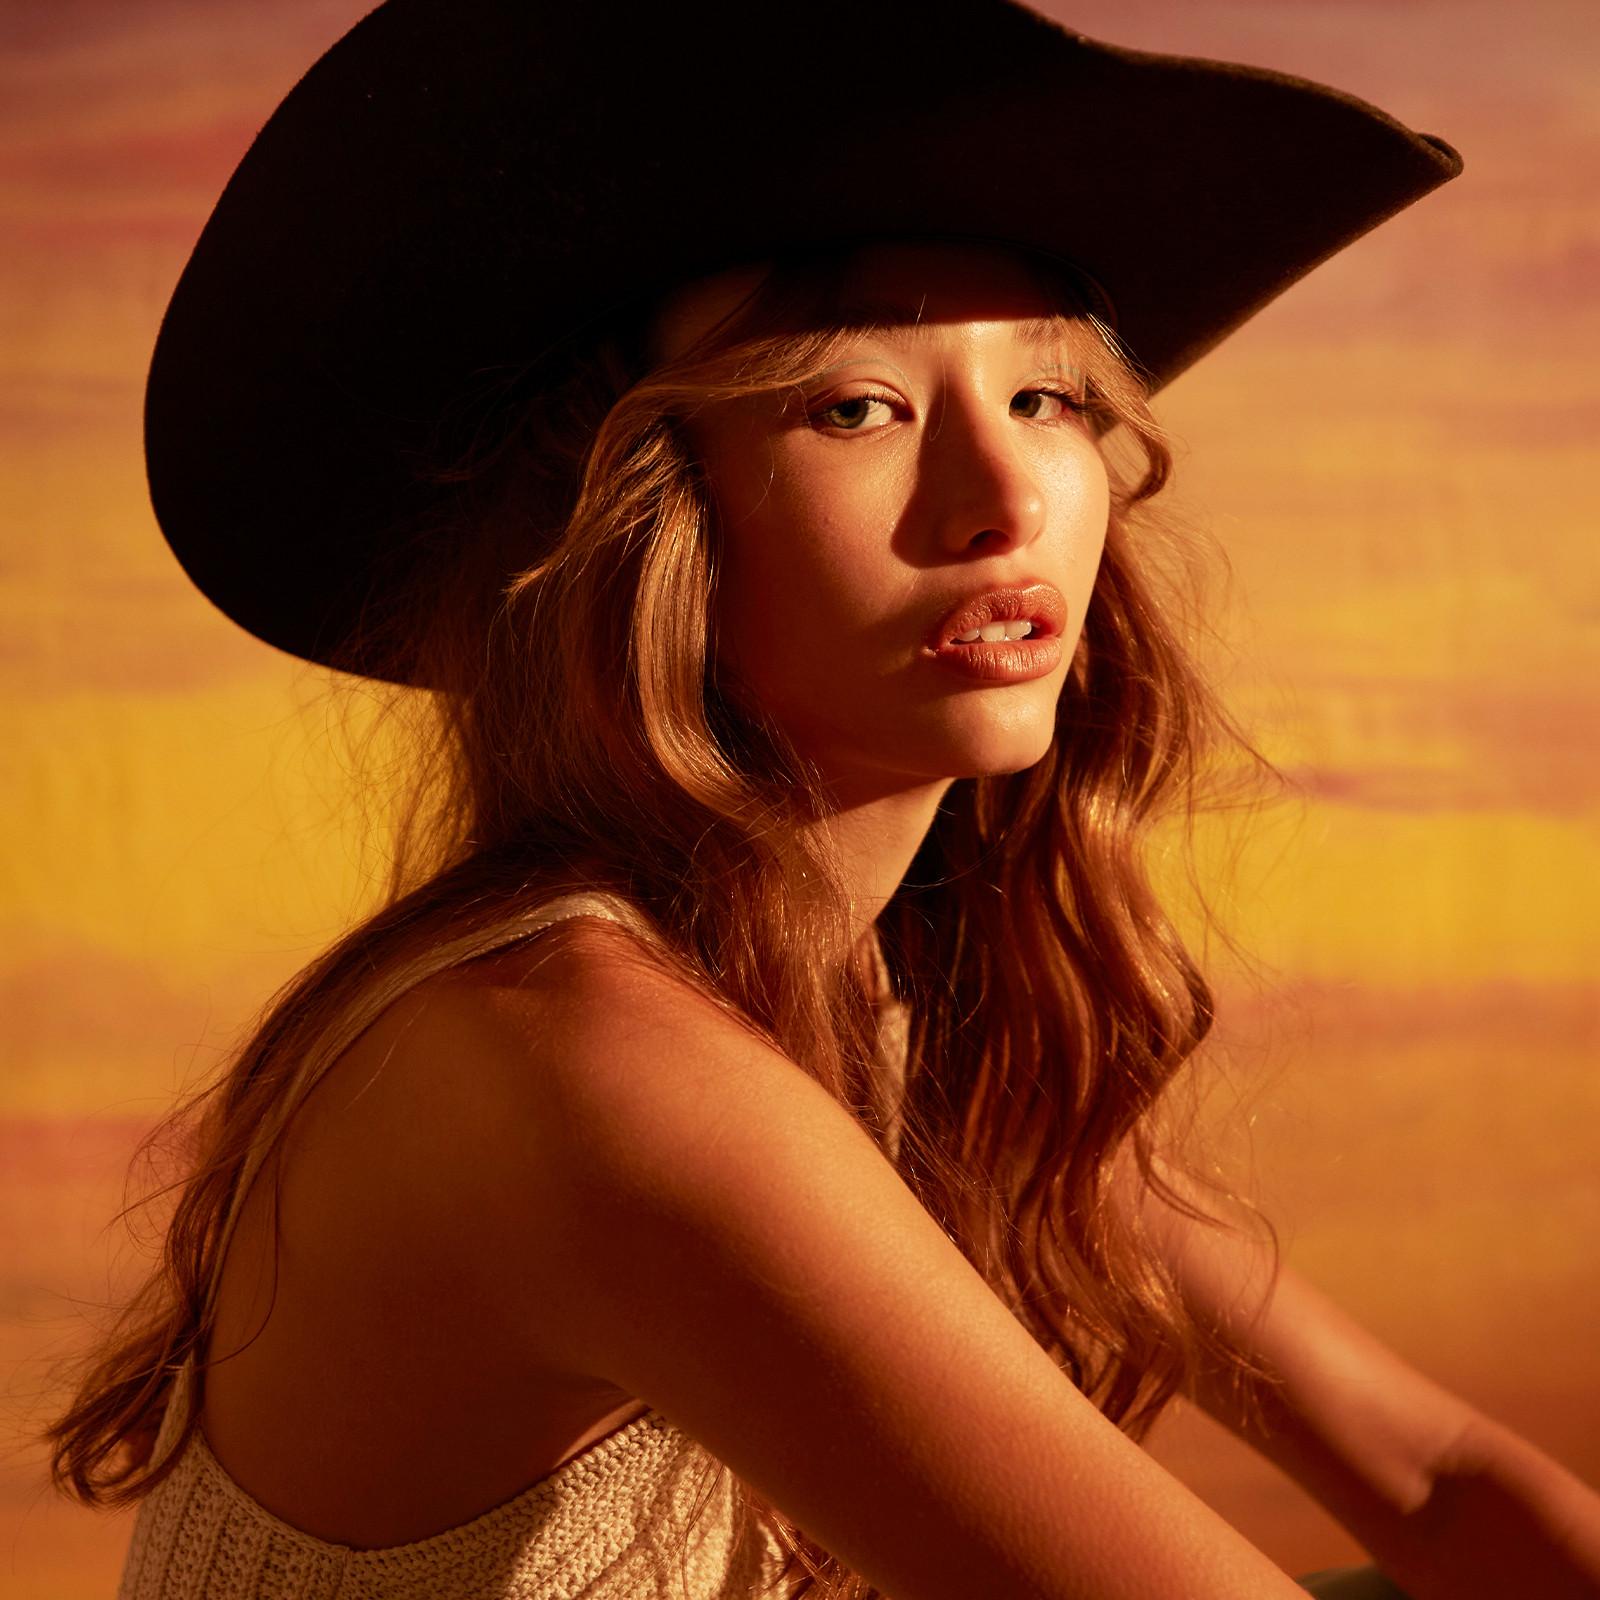 Model wears cowgirl hat and crochet top